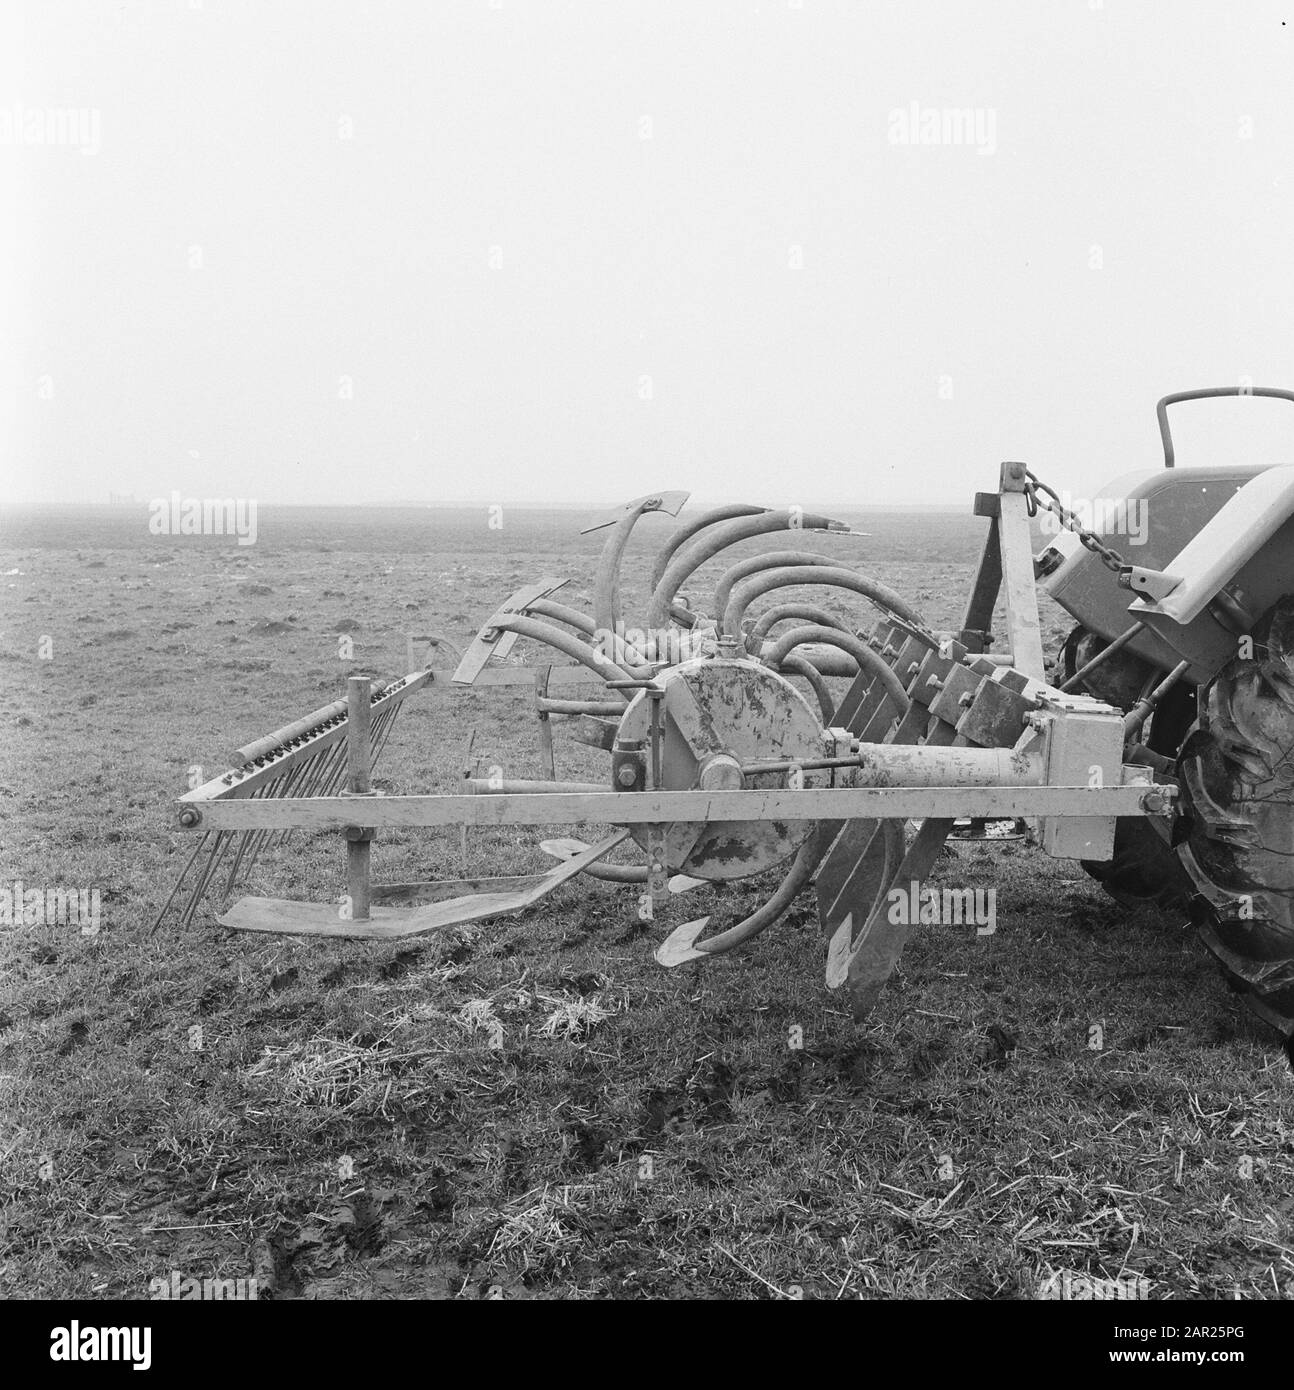 agricultural machinery and implements, work, spinning machines, rottaspa Date: March 1958 Location: Zevenhuizen Keywords: agricultural machinery and tools, spreading, work Personal name: rotaspa Stock Photo